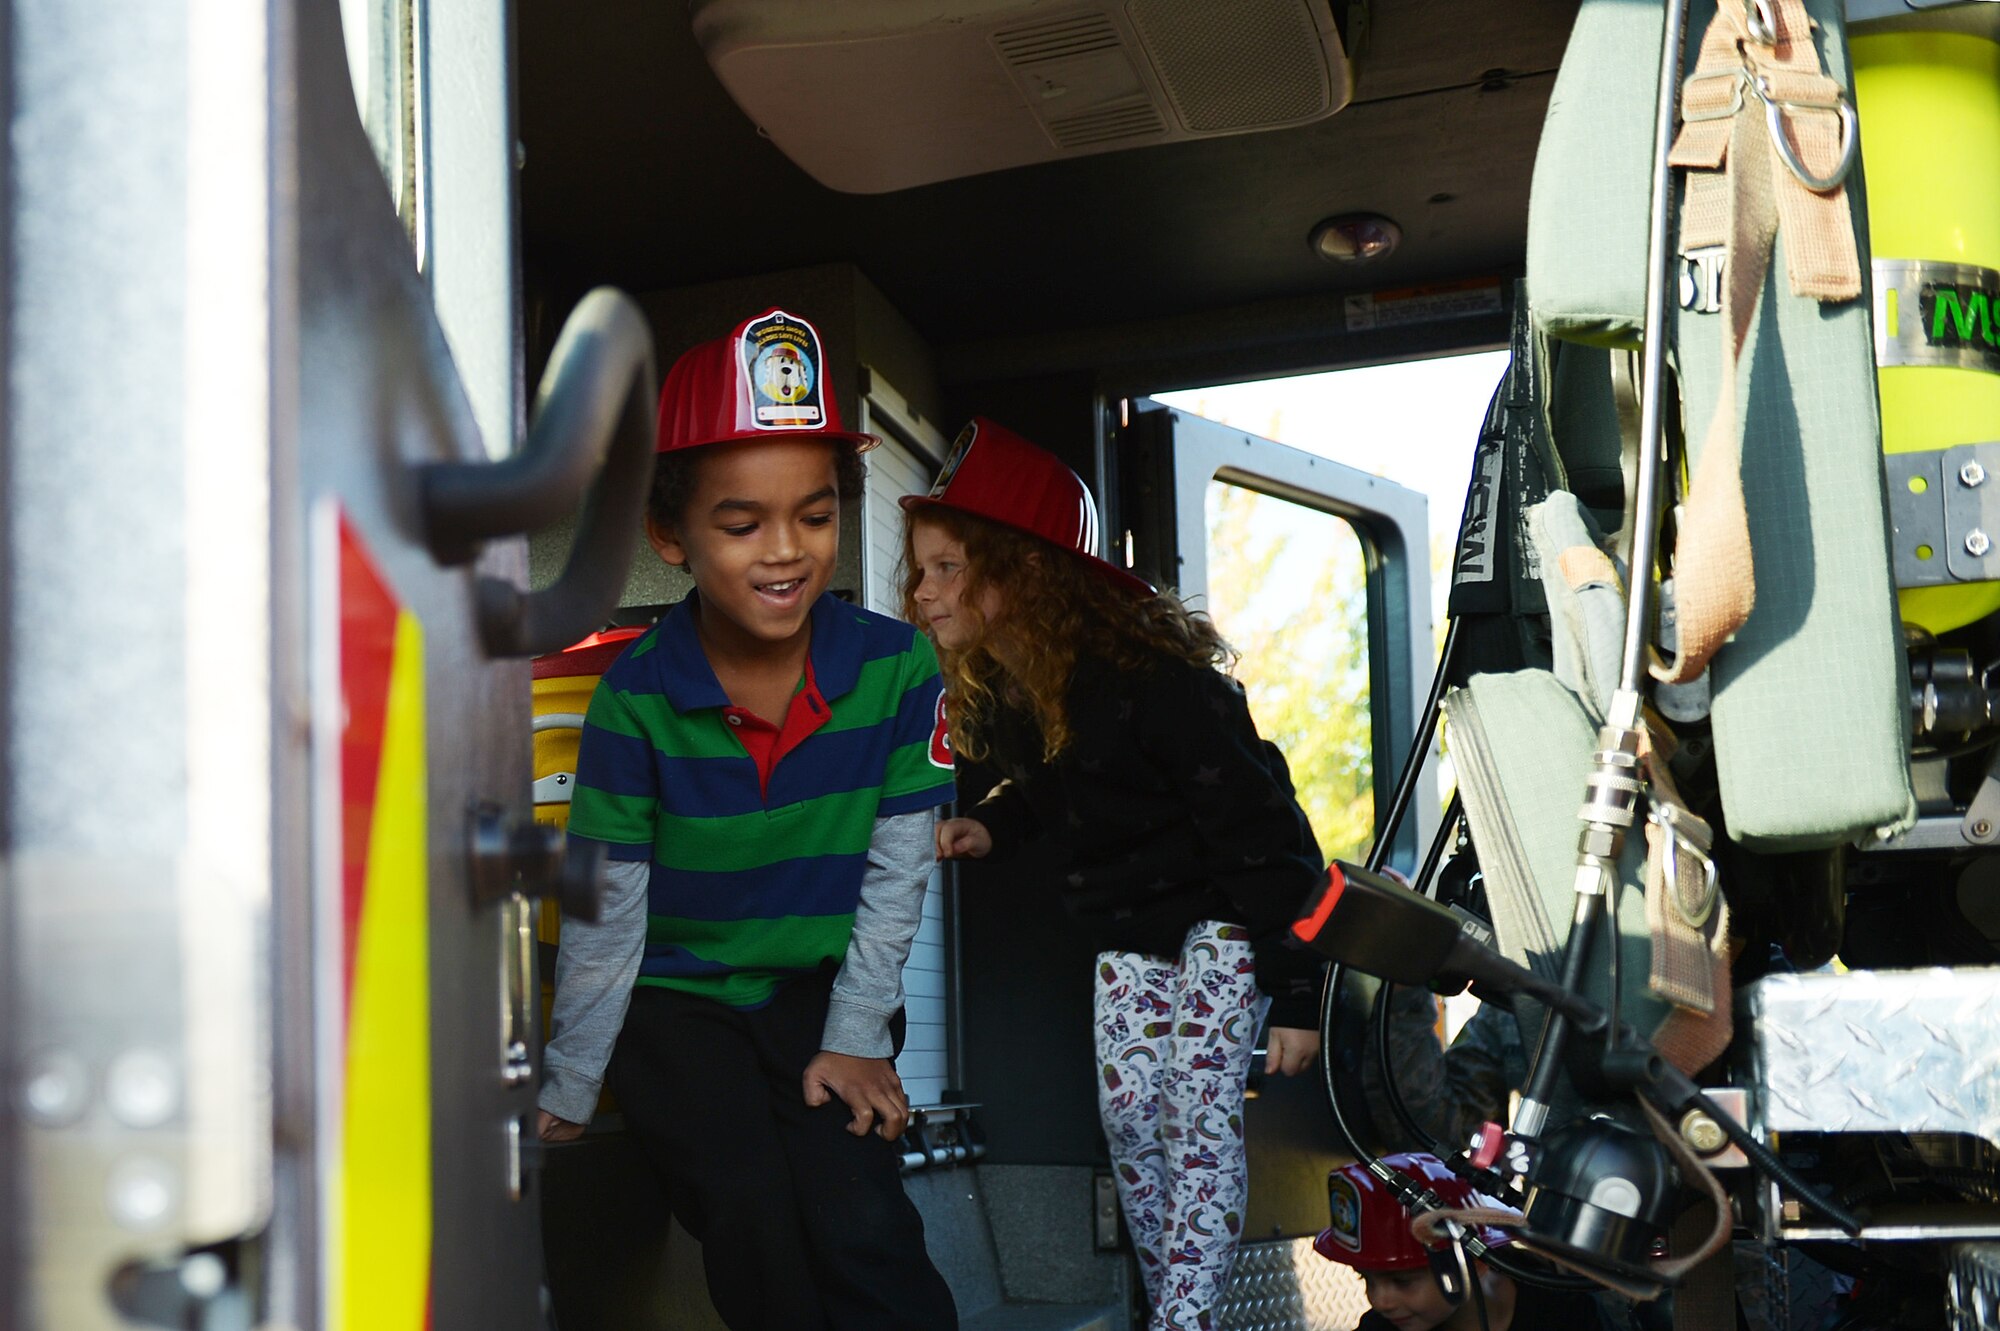 Lakenheath Elementary School children explore a fire truck during Fire Prevention Week at Royal Air Force Lakenheath, England, Oct. 10, 2018. The children had the chance to practice fire drills and witness fire saftey demonstrations in observance of FPW. (U.S. Air Force photo/Airman 1st Class Shanice Williams-Jones)